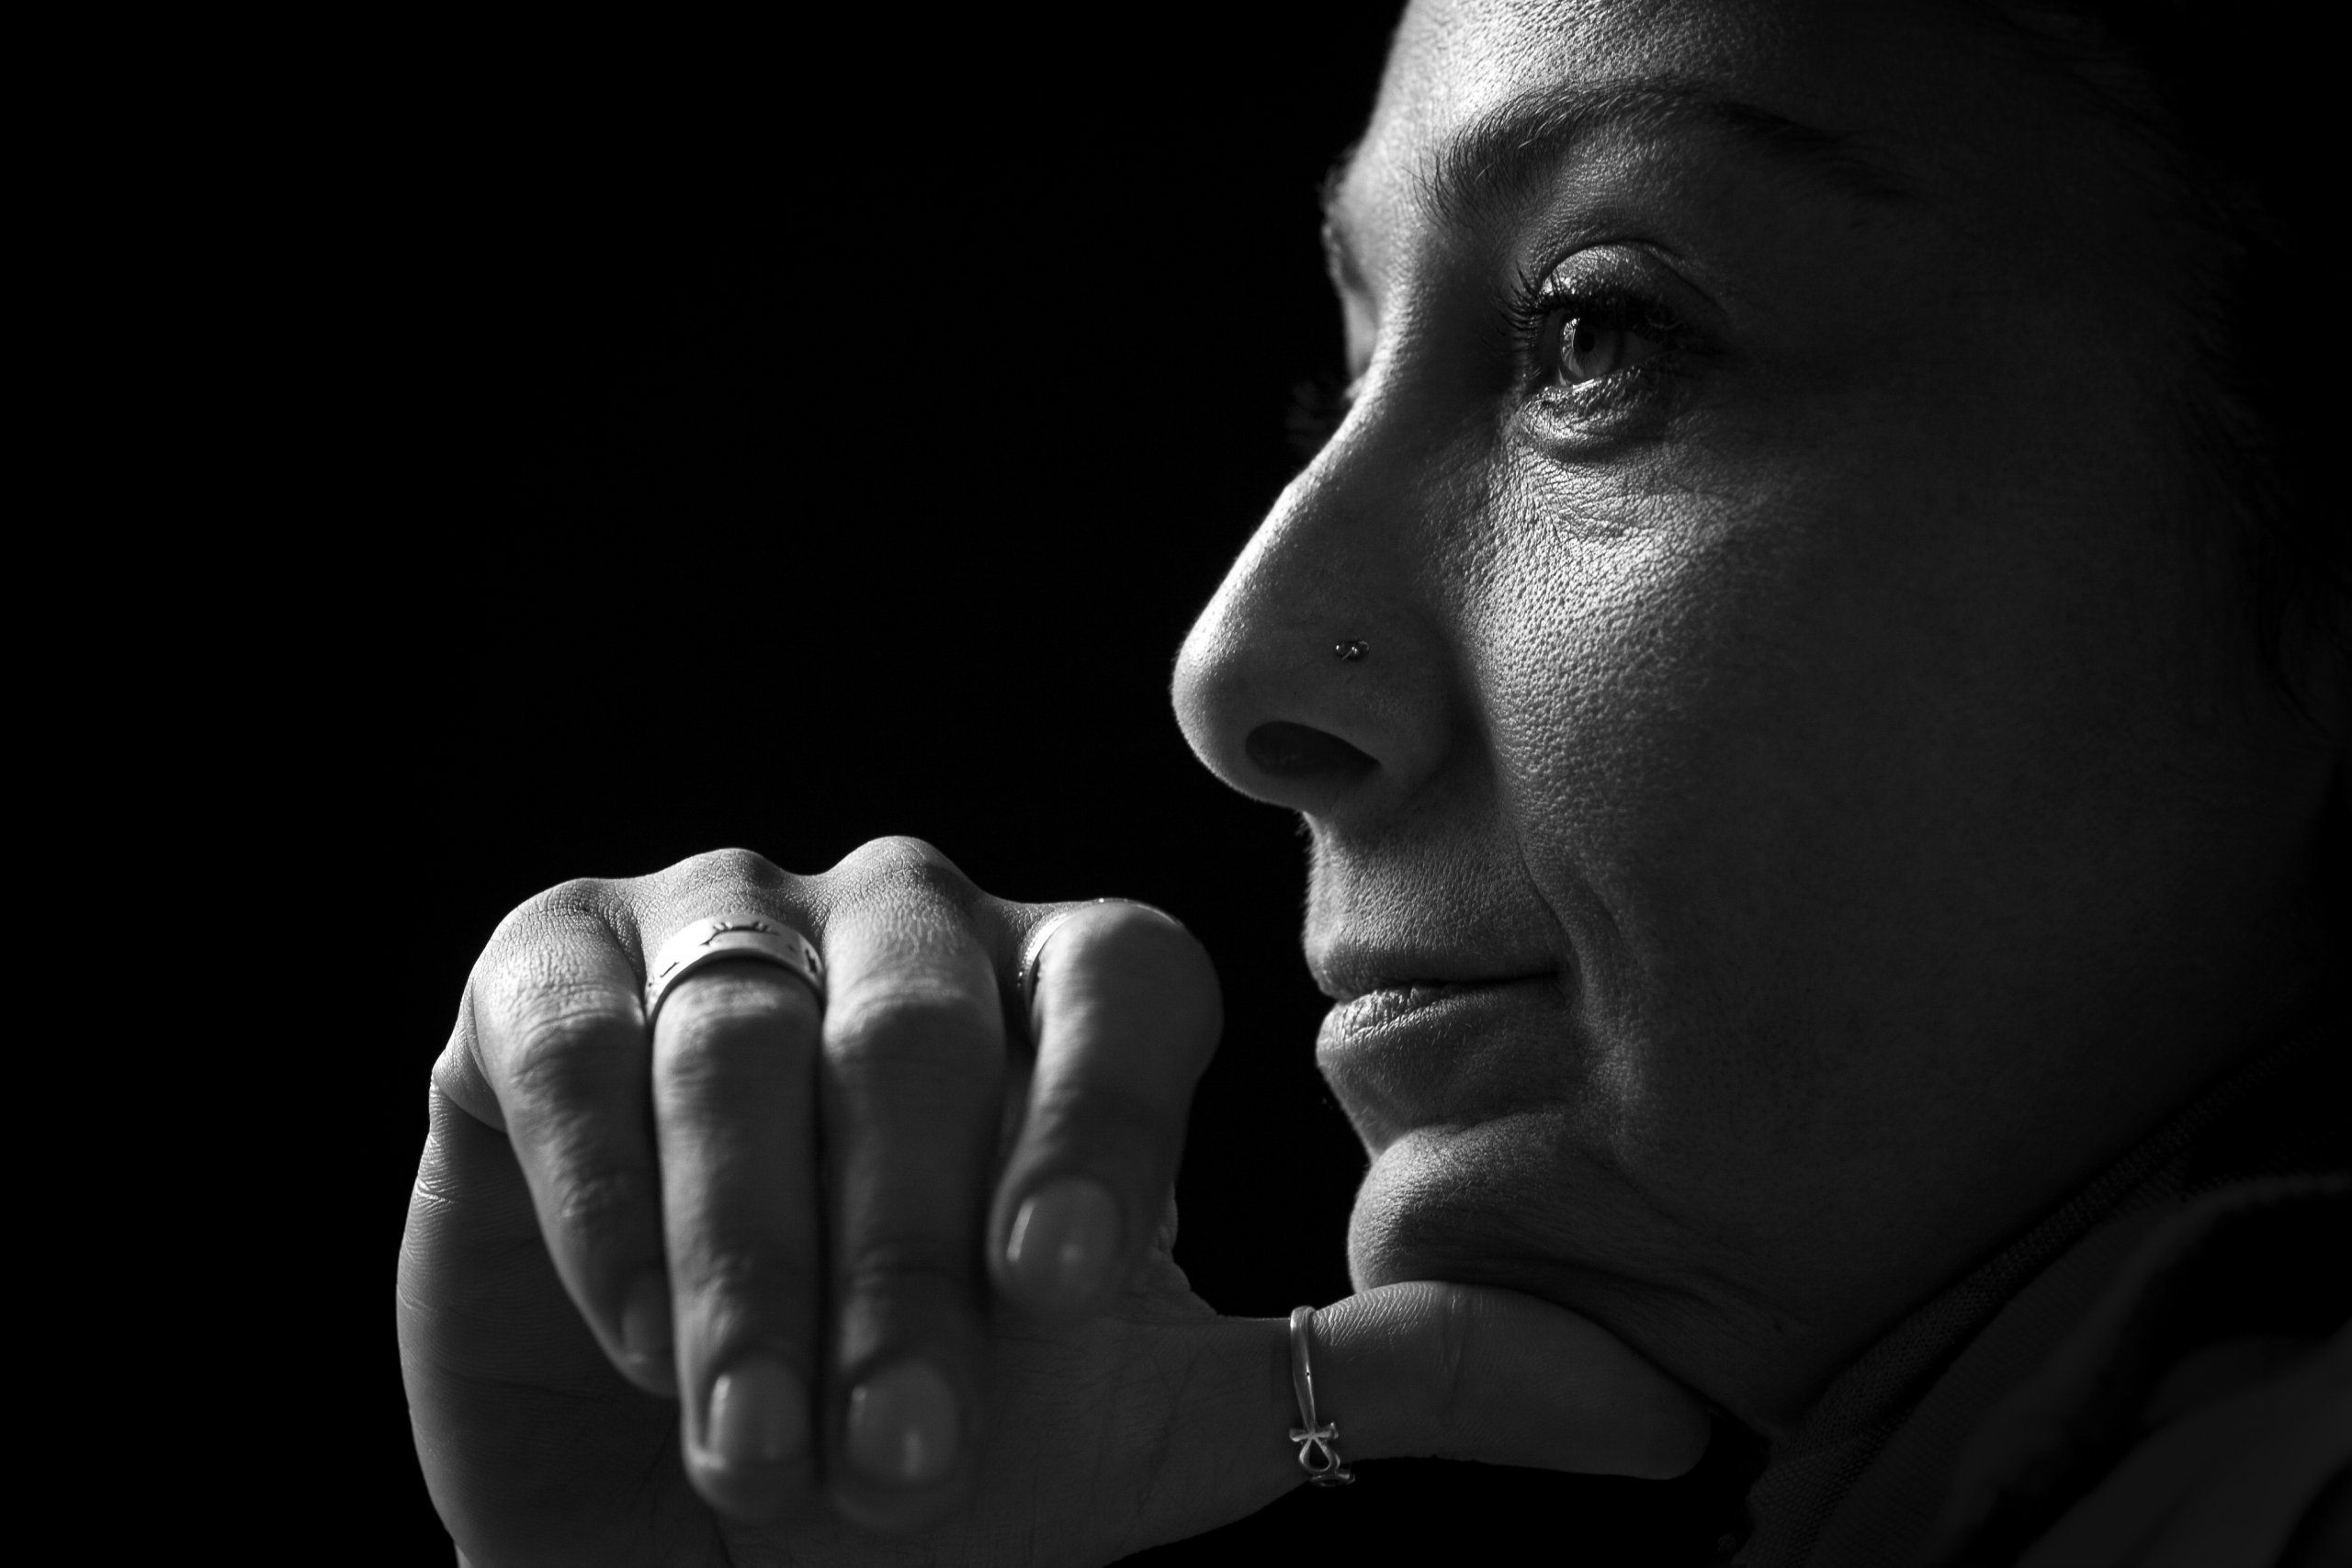 Woman shrouded in black looking off into distance